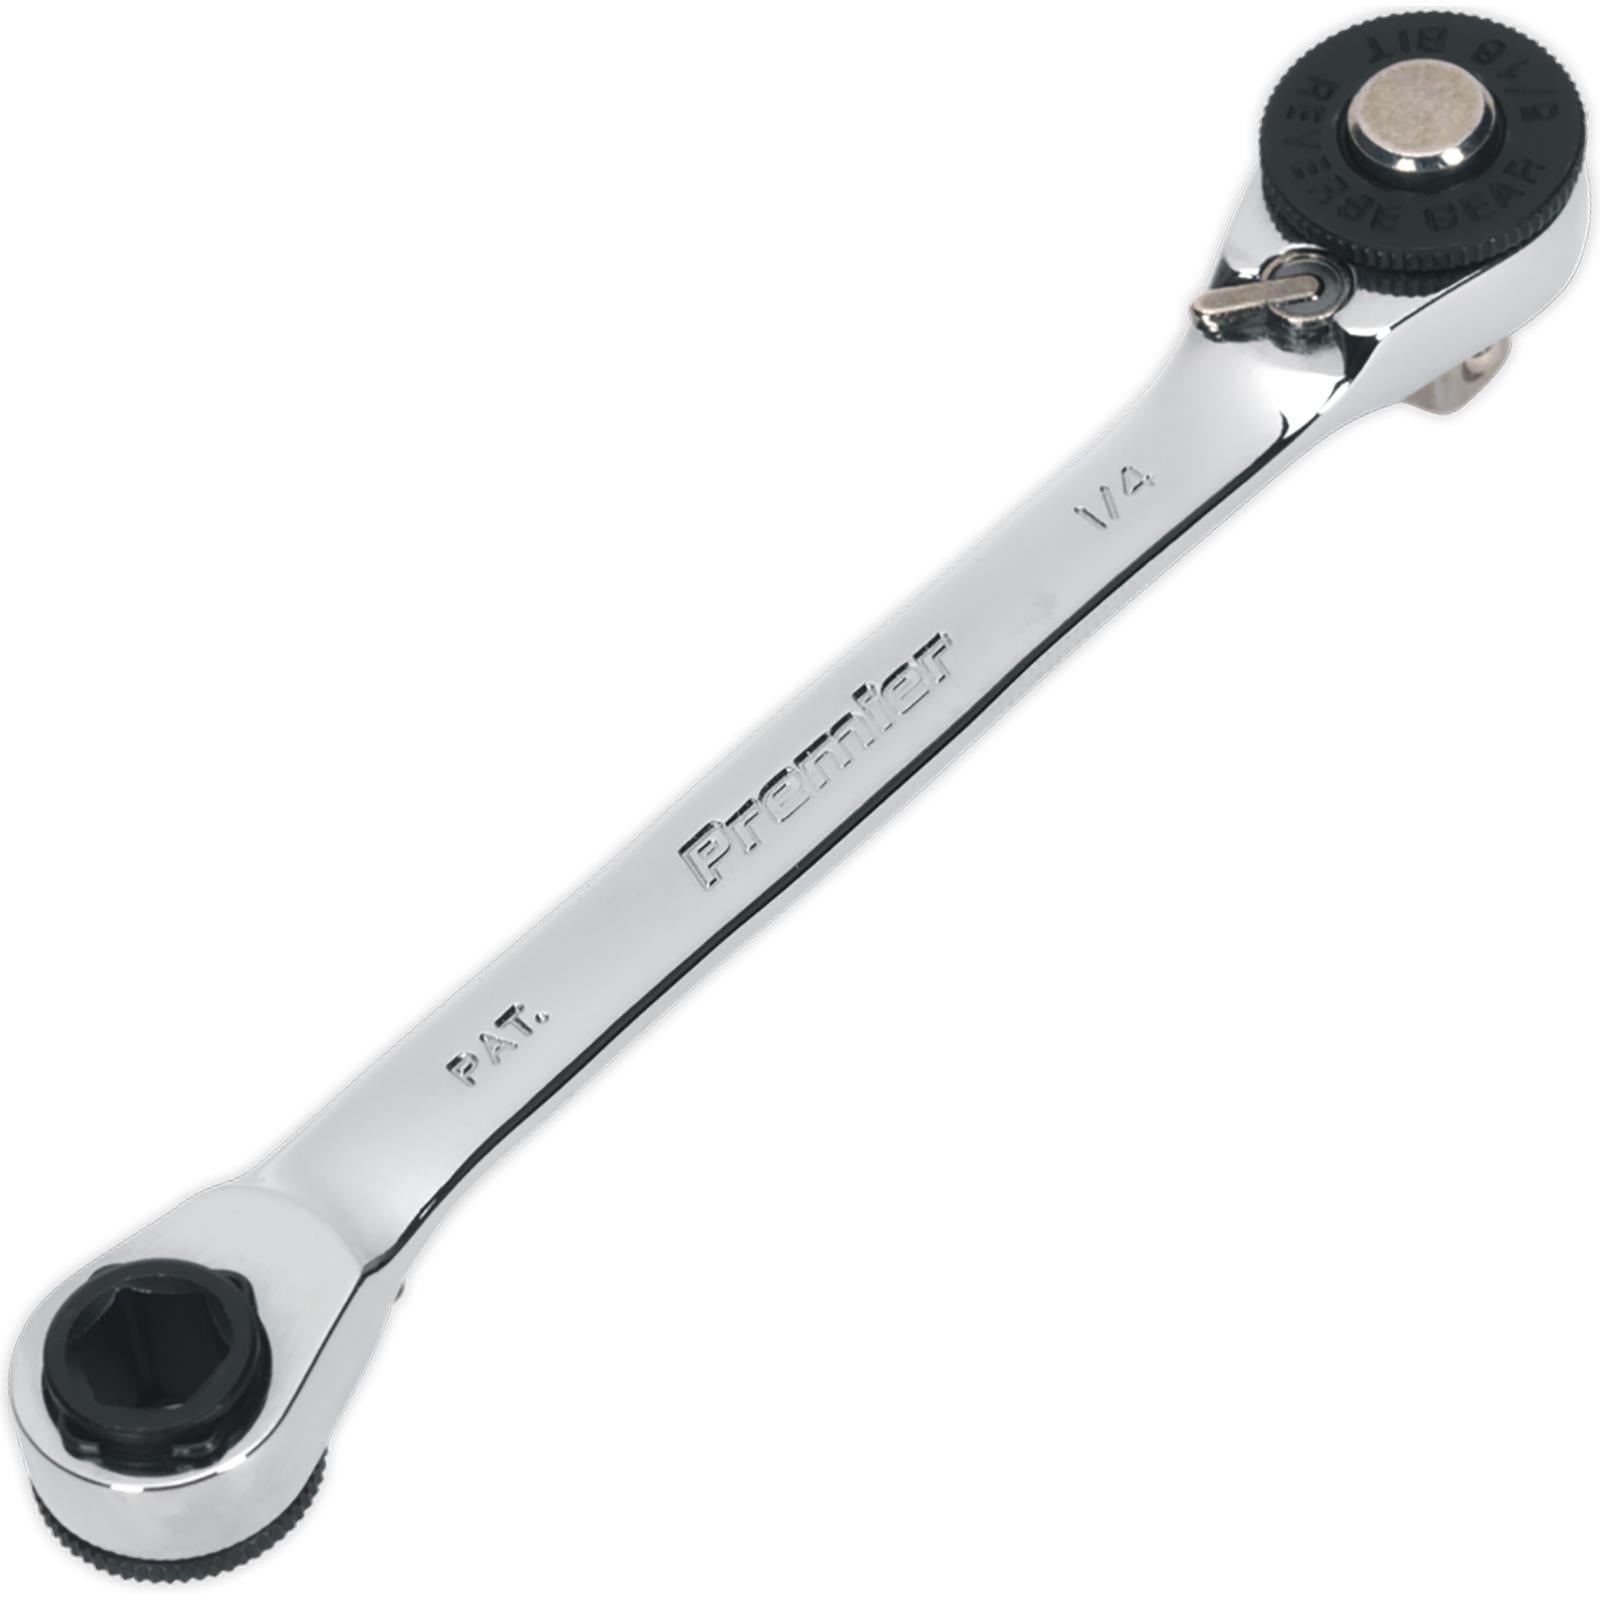 Sealey Premier 1/4" Hex x 5/16" Hex Reversible Ratchet Spanner with 1/4" Drive Adaptor